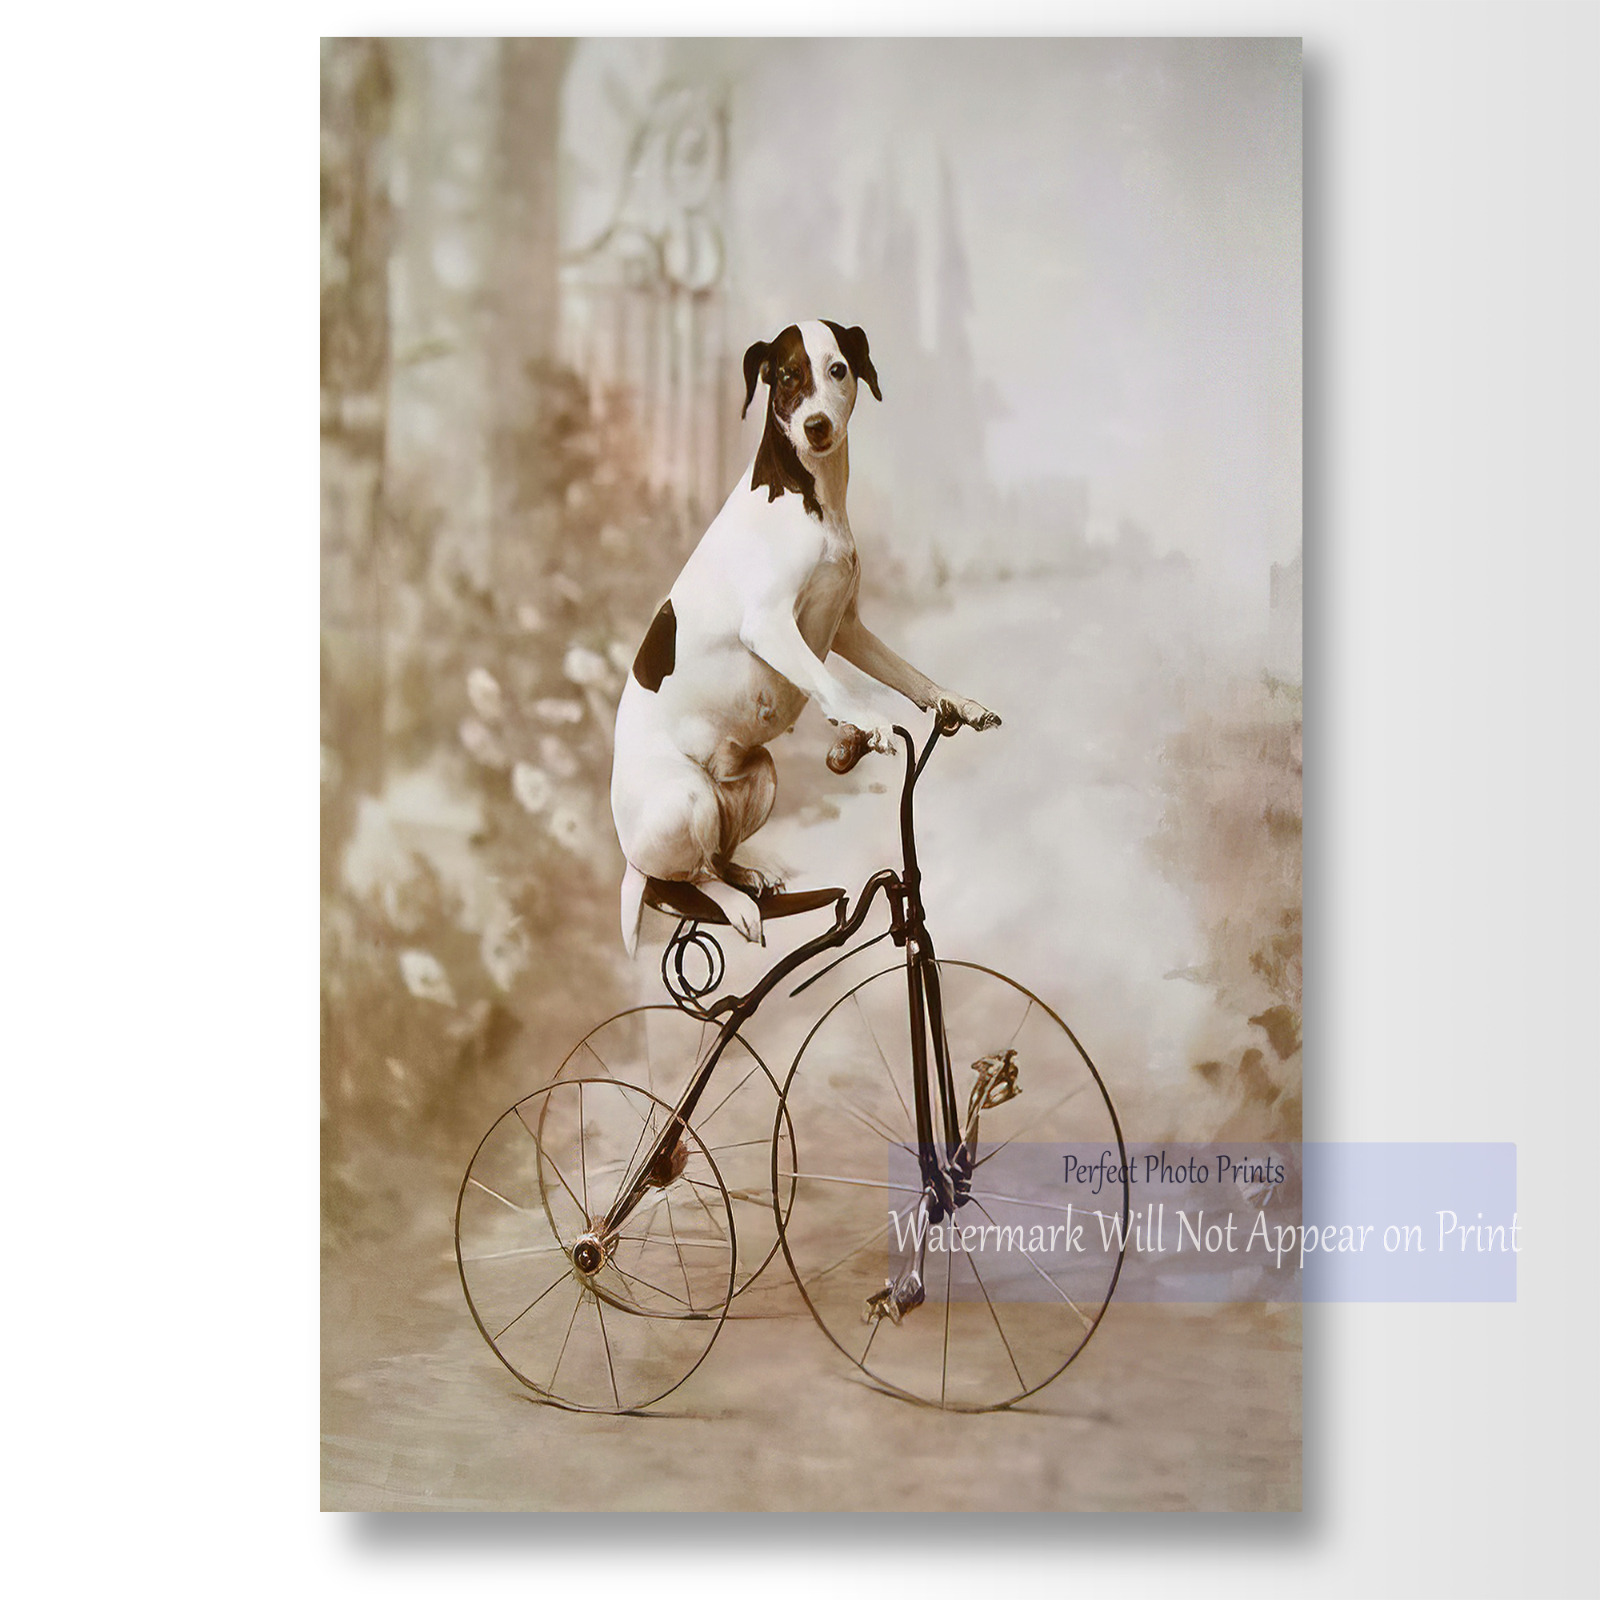 Antique Studio Photo of Whimsical Dog on Tricycle Vintage Photo Print